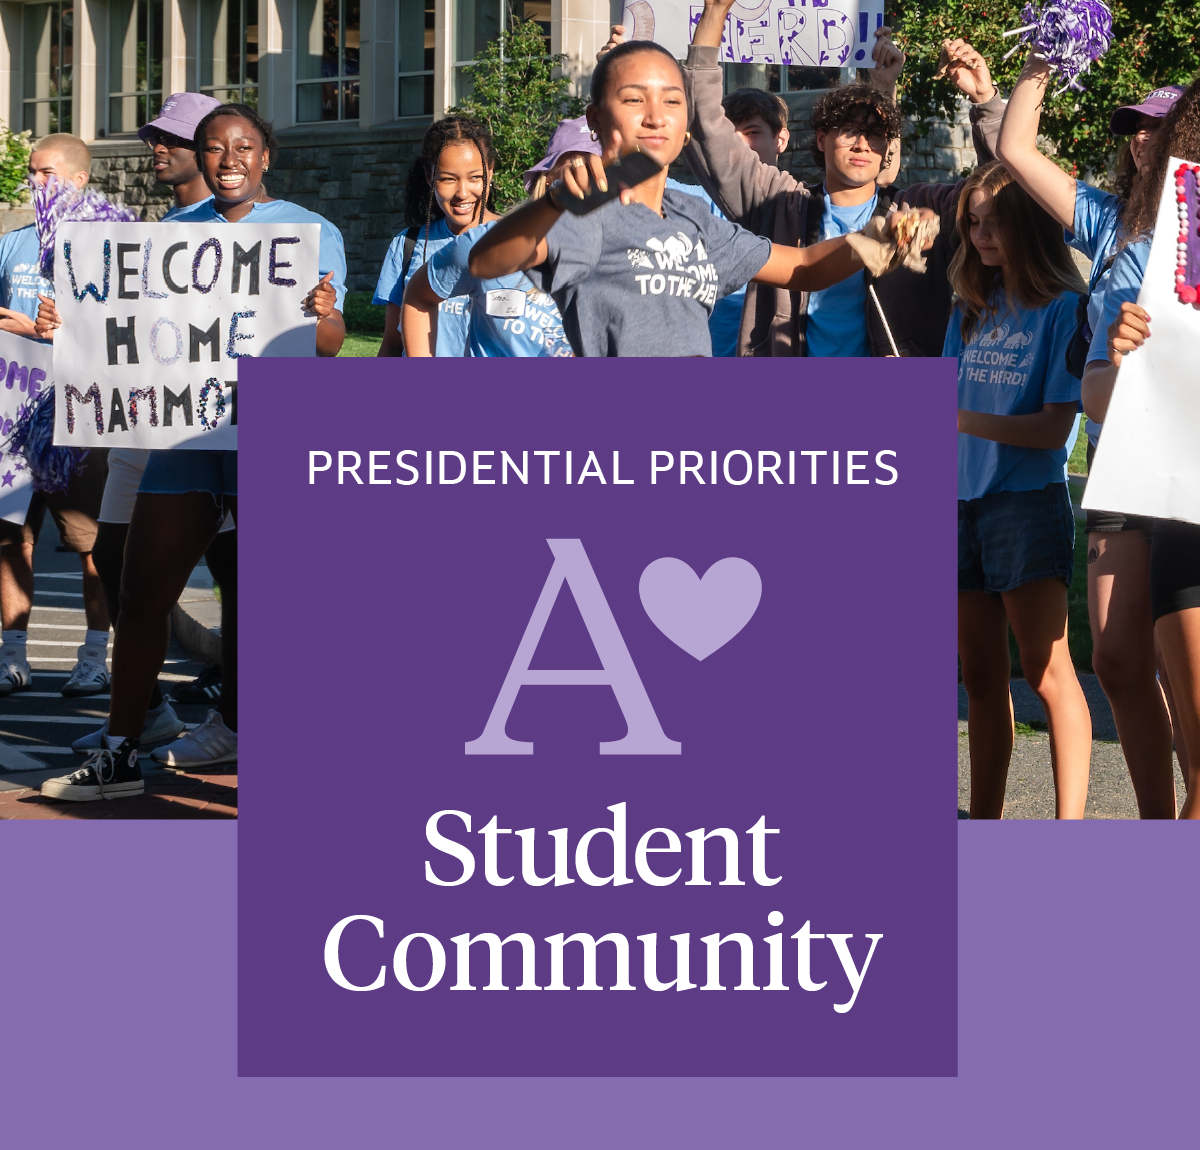 crowd of enthusiastic students welcome the incoming class with mammoth signs and cheers, with logo for Presidential Priorities: Student Community and Belonging